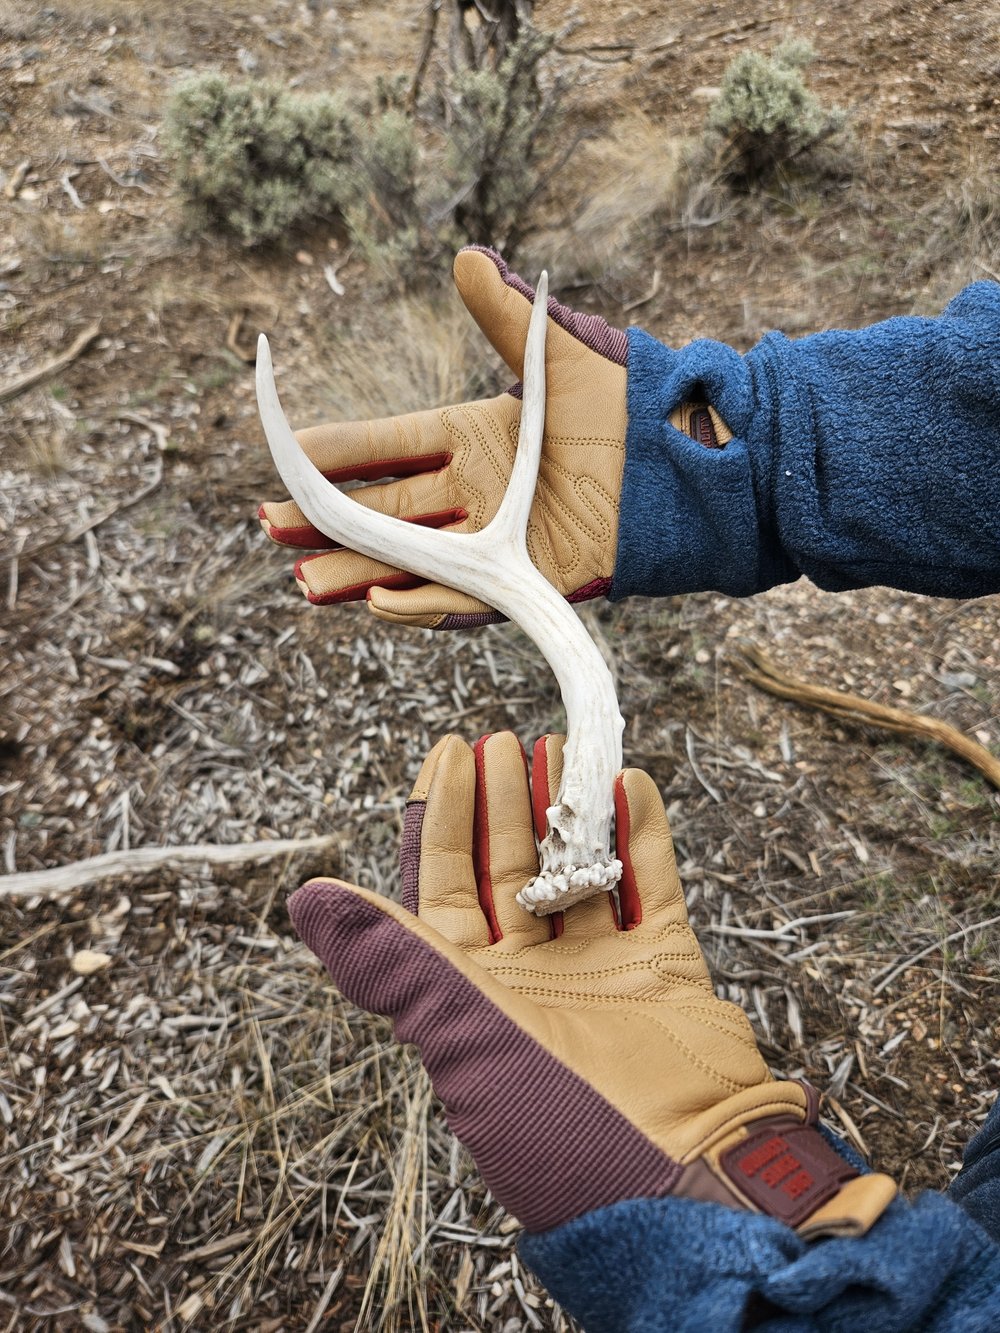 Our first Mule Deer antler shed!